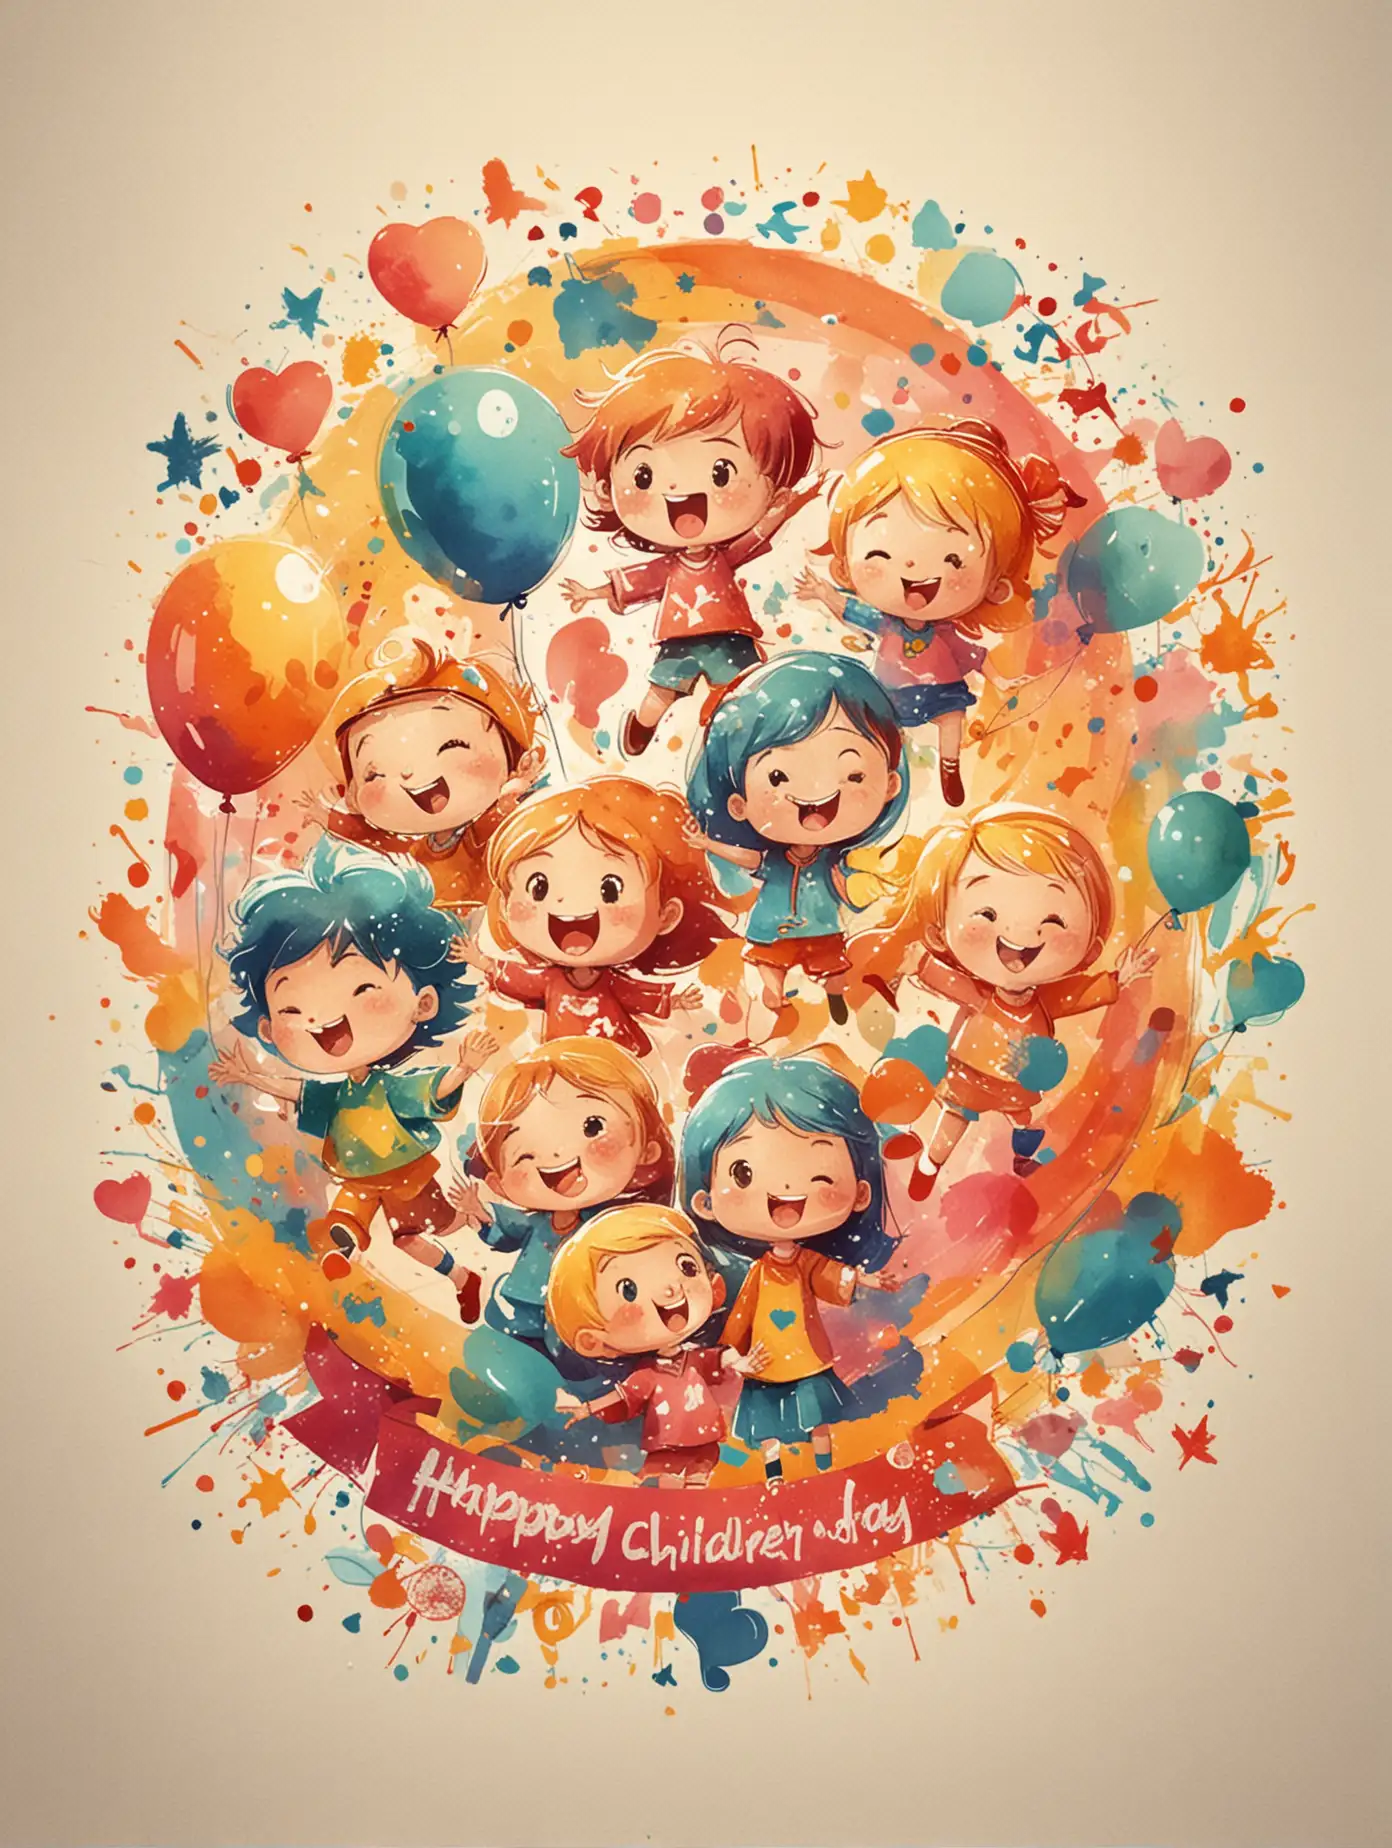 Joyful Children Celebrating in Abstract Style for Happy Childrens Day